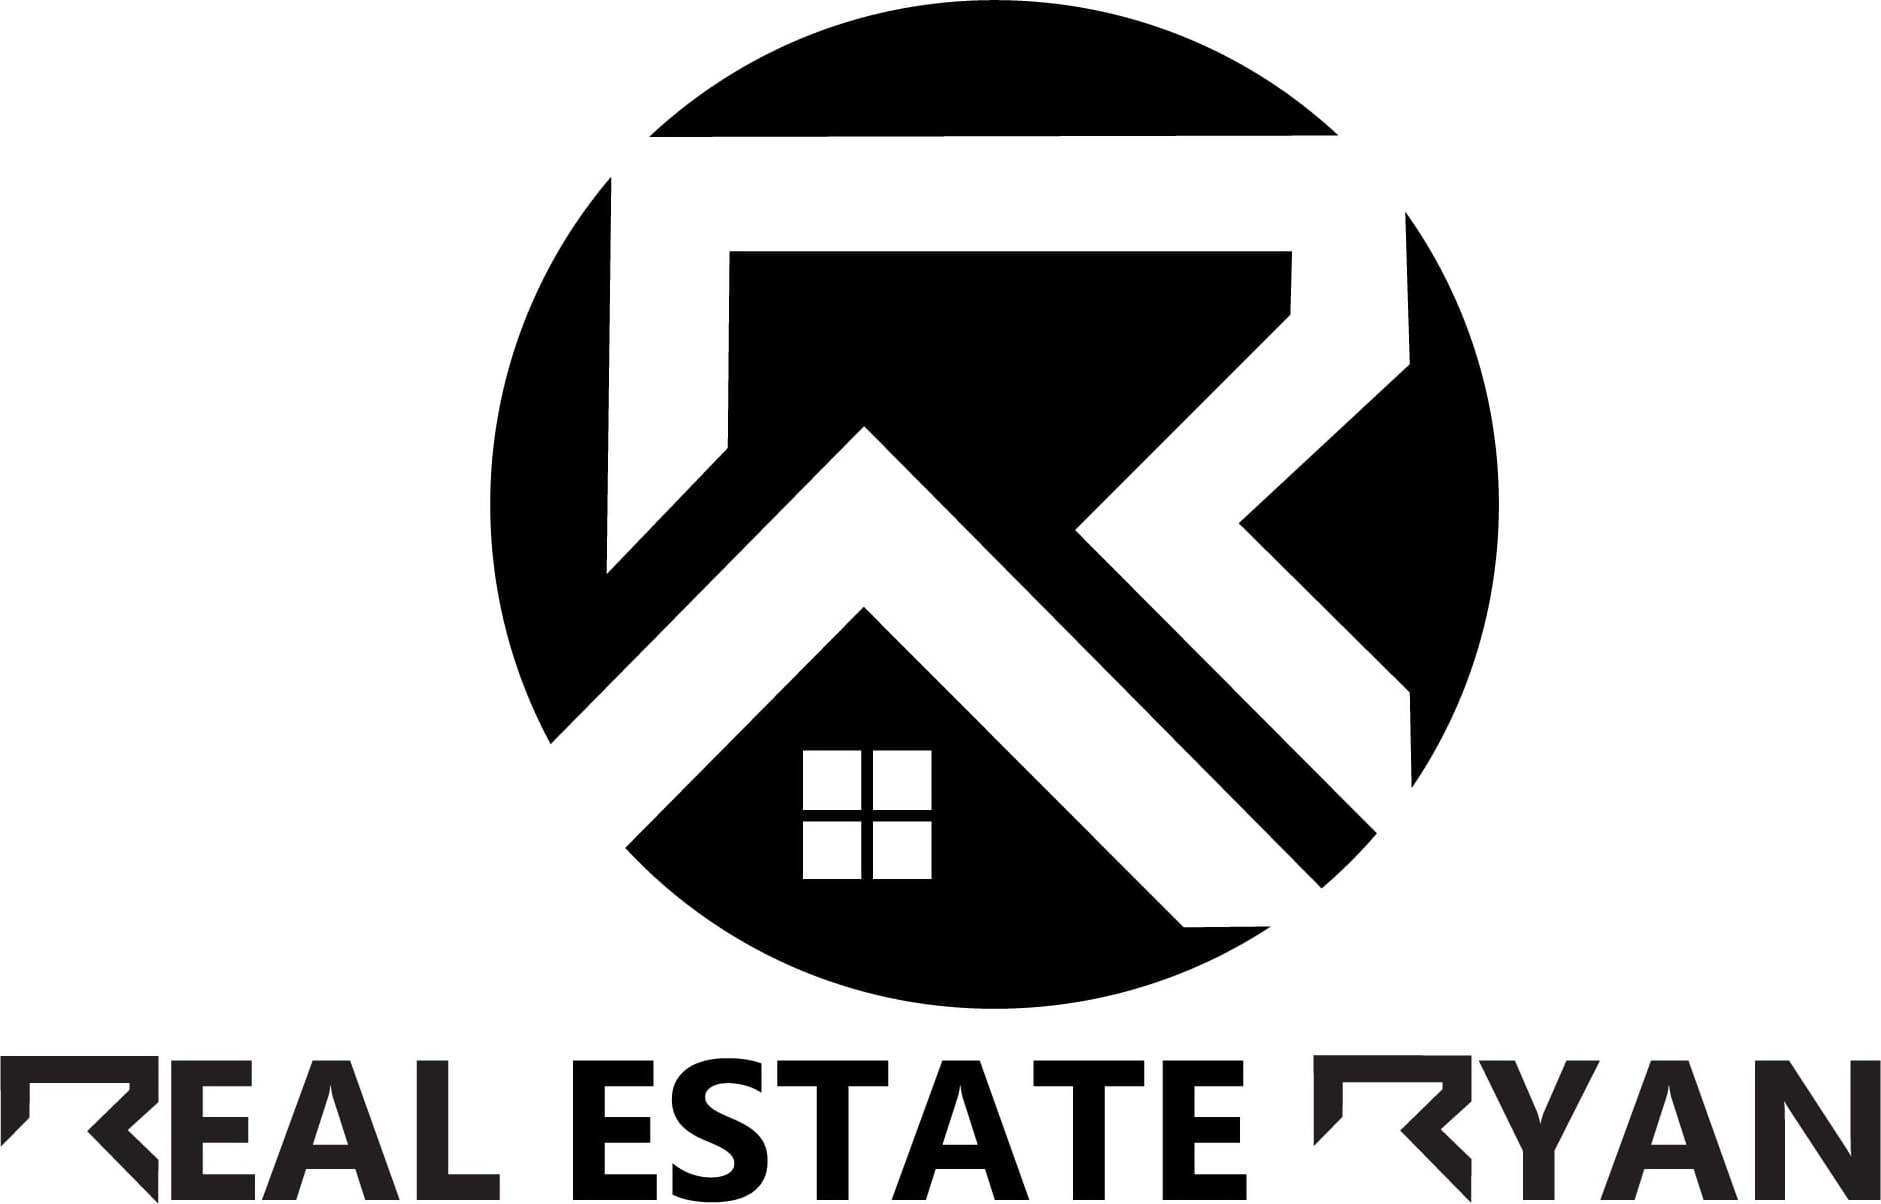  THE LETTER 'R' AND REAL ESTATE RYAN